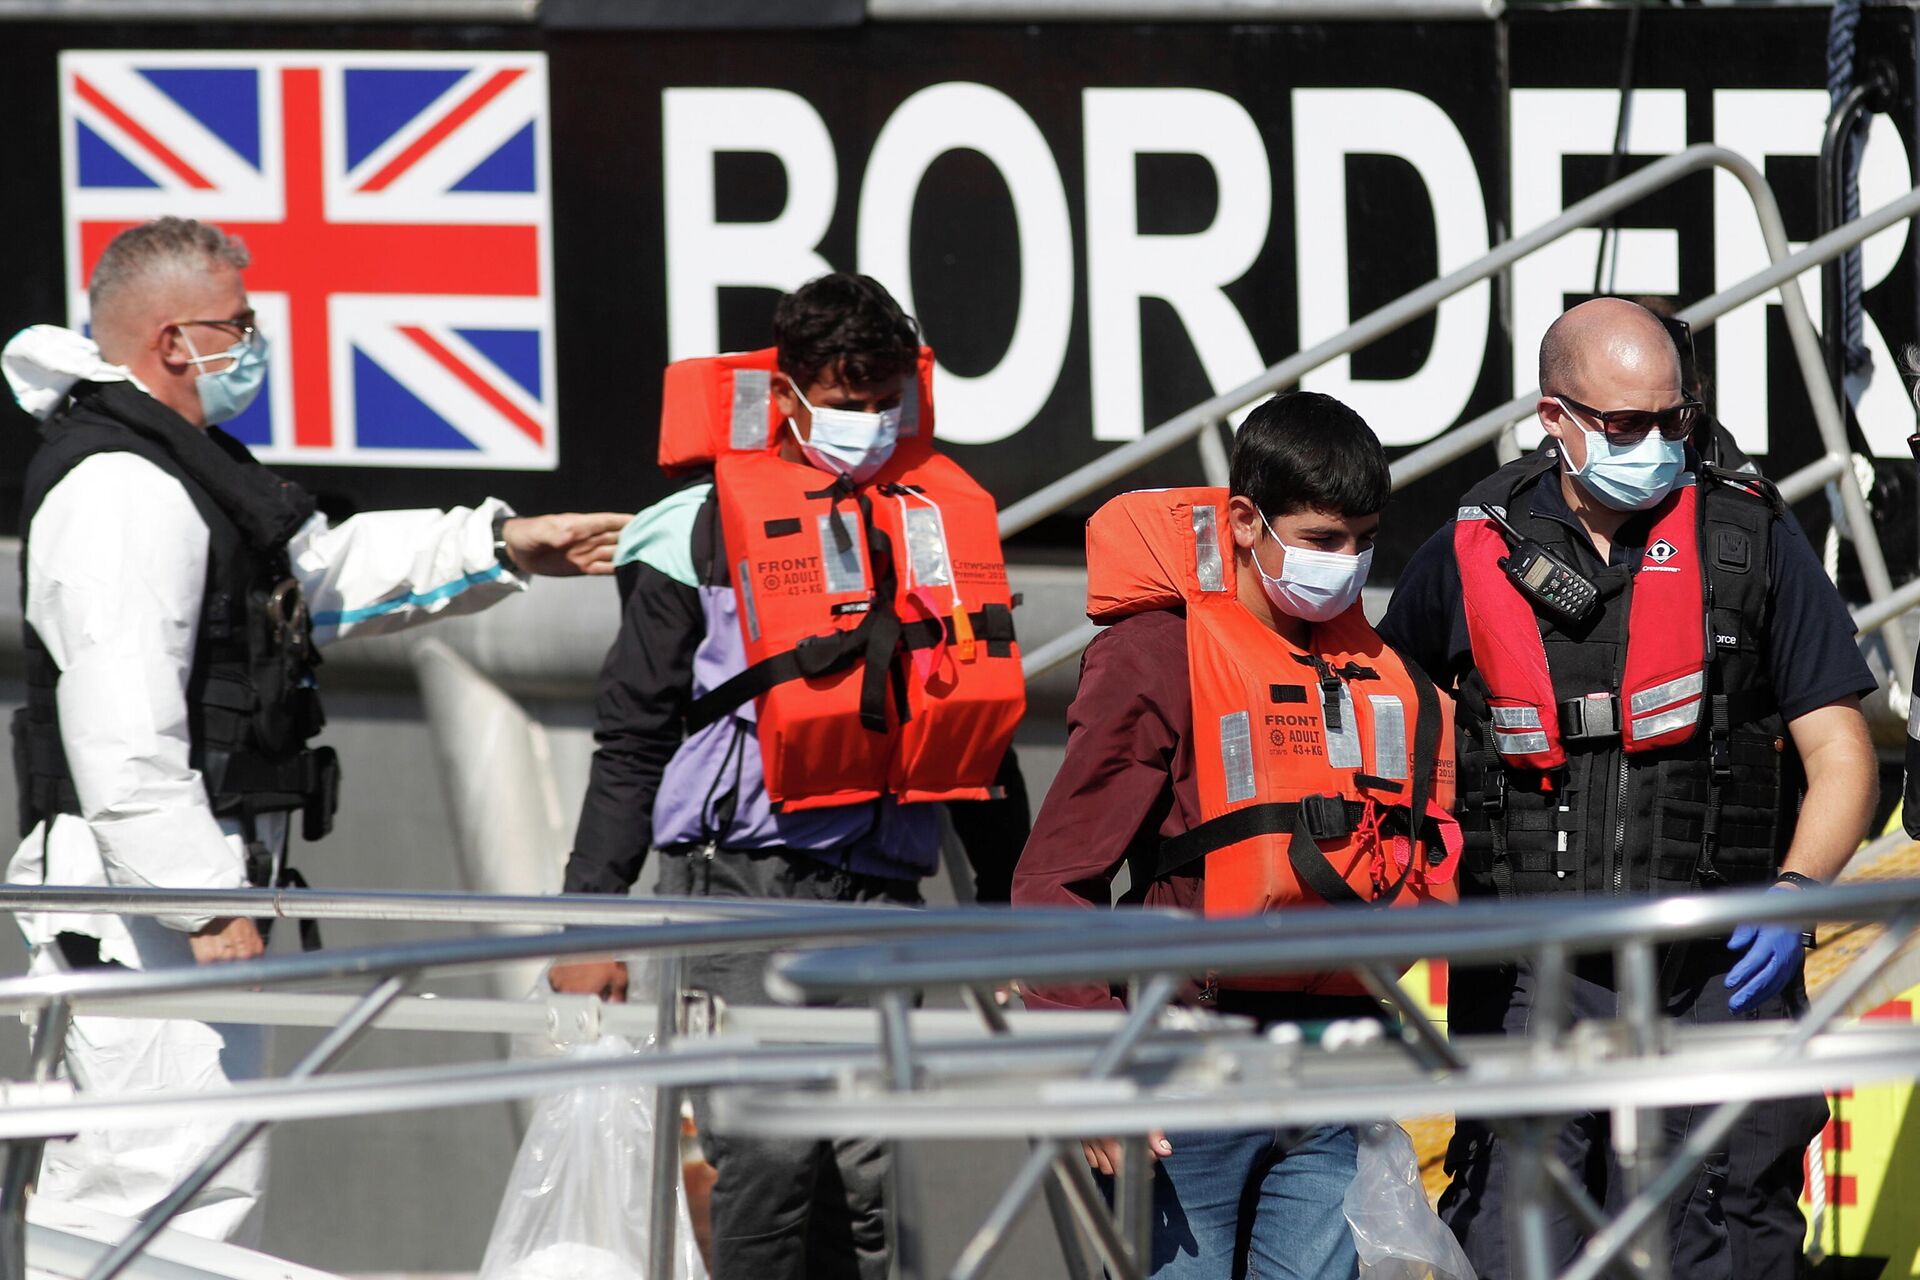 Migrants rescued from the English Channel are brought into Dover on the Border Force Catamaran Rescue Boat, BF Hurricane, Britain, September 8, 2021 - Sputnik International, 1920, 09.09.2021